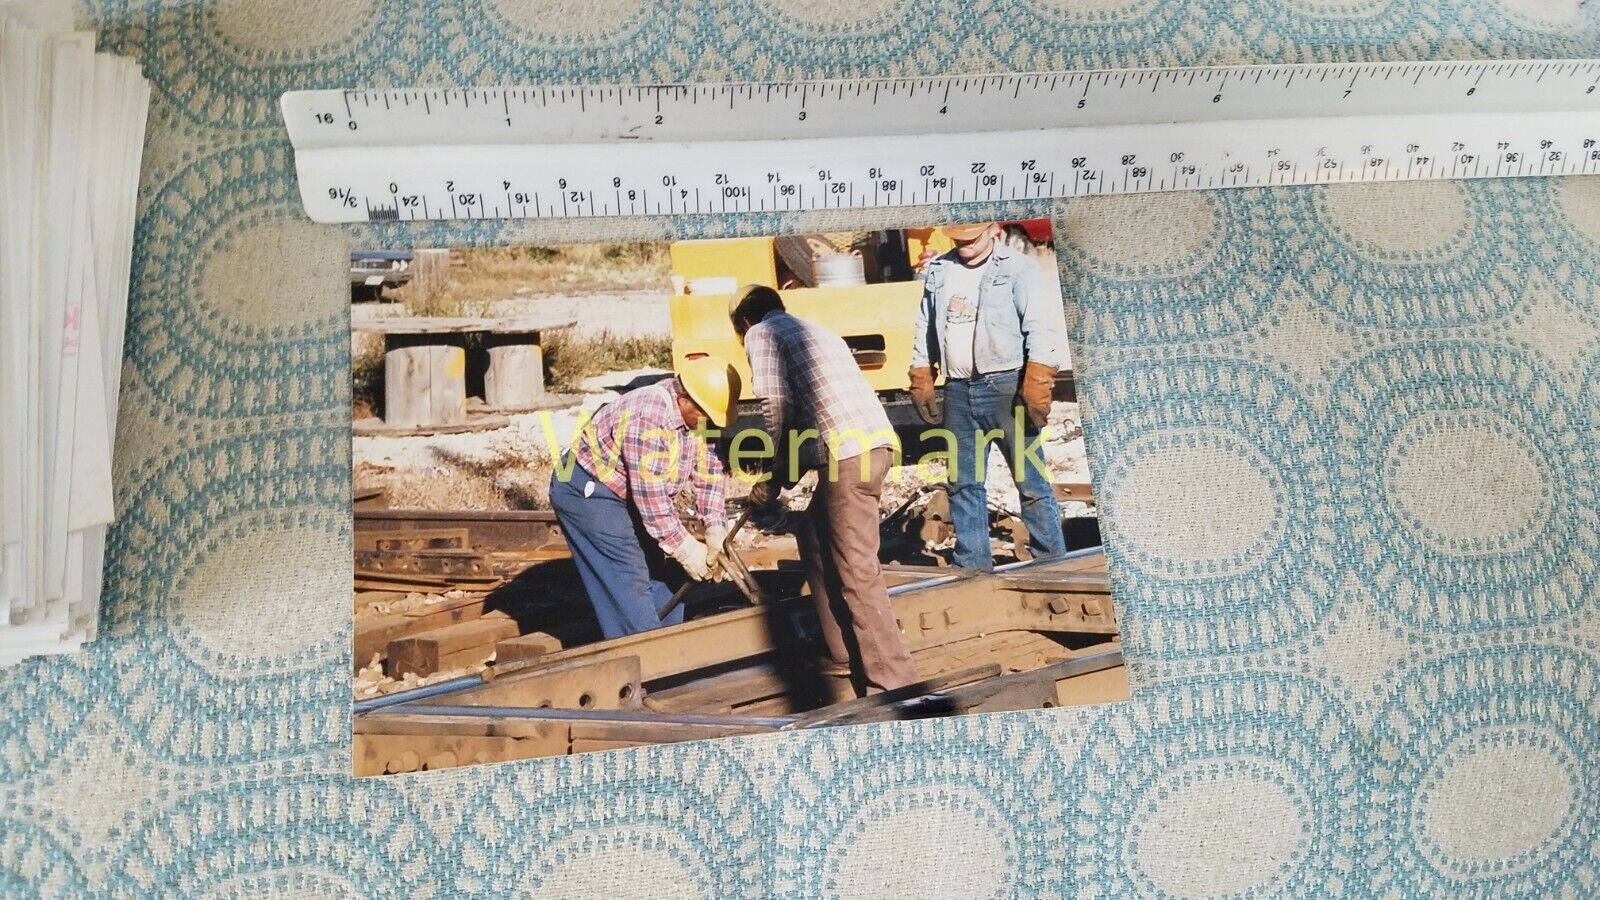 X599 TRAIN ENGINE PHOTO RR WORKERS DOING TRACK MAINTENANCE